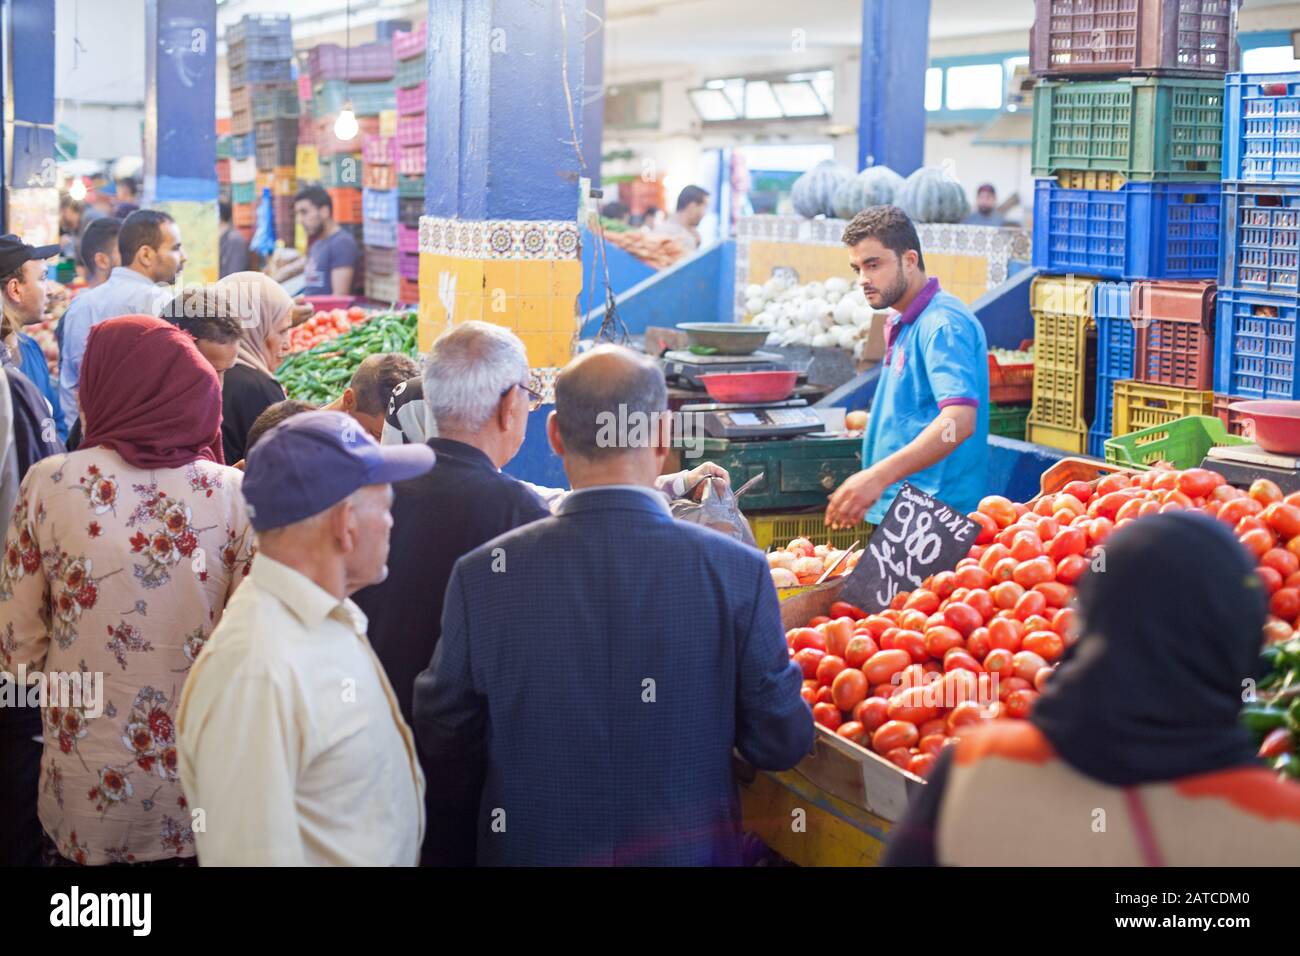 The crowded fruit and vegetable market in the Medina Stock Photo